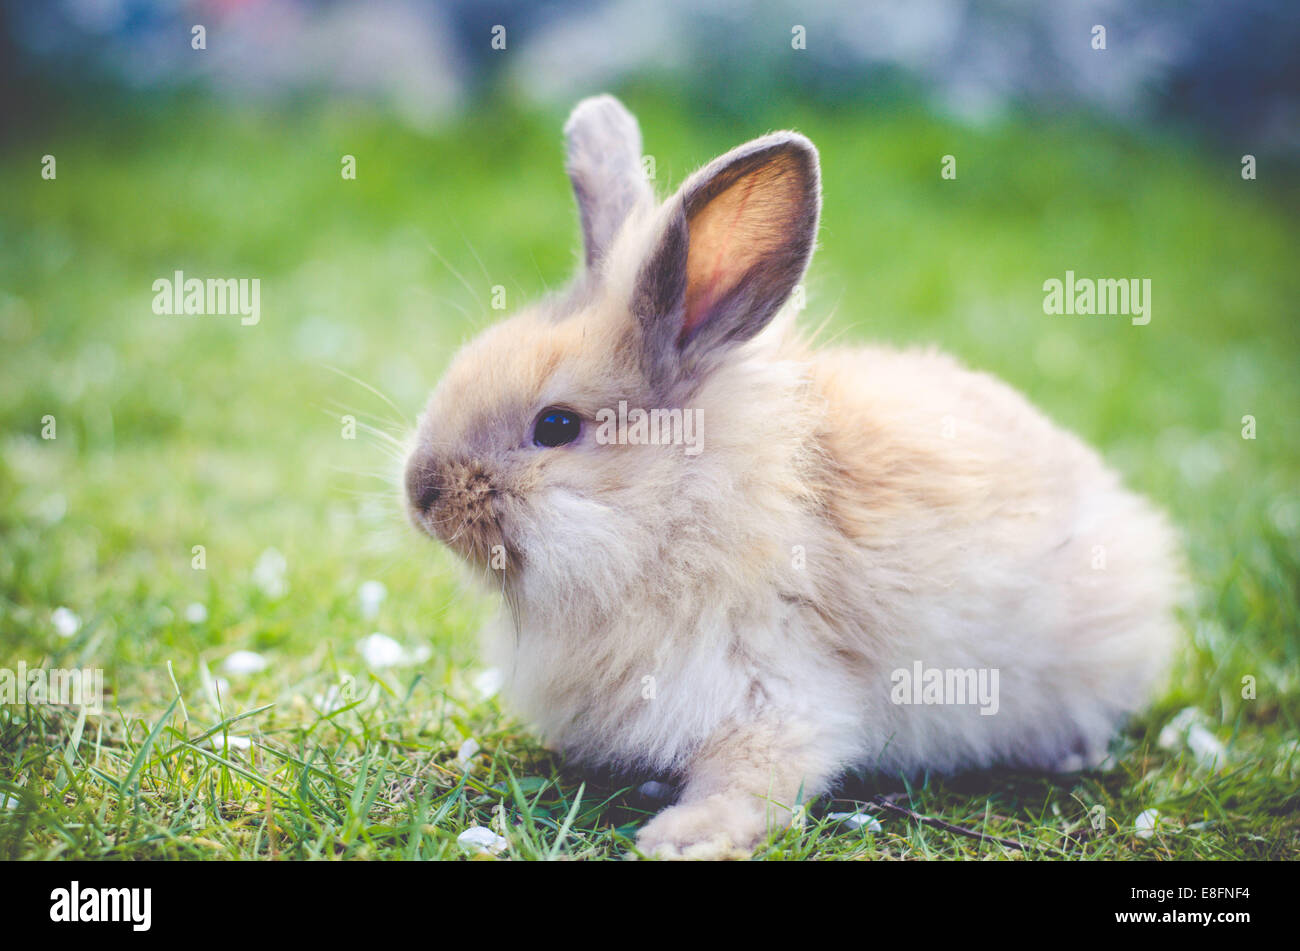 Rabbit sitting on grass Banque D'Images